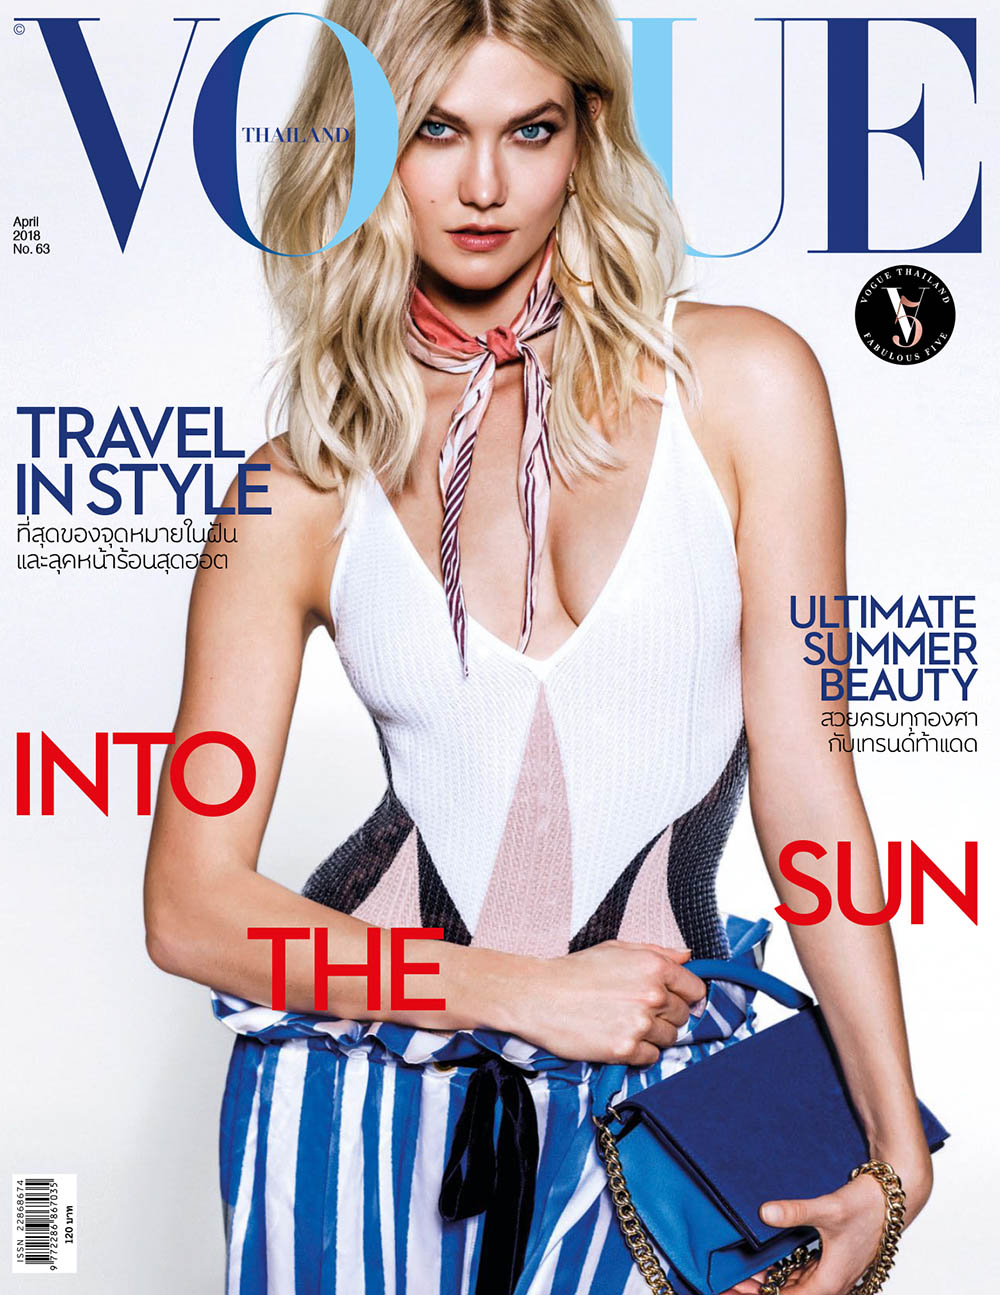 Karlie Kloss covers Vogue Thailand April 2018 by Russell James